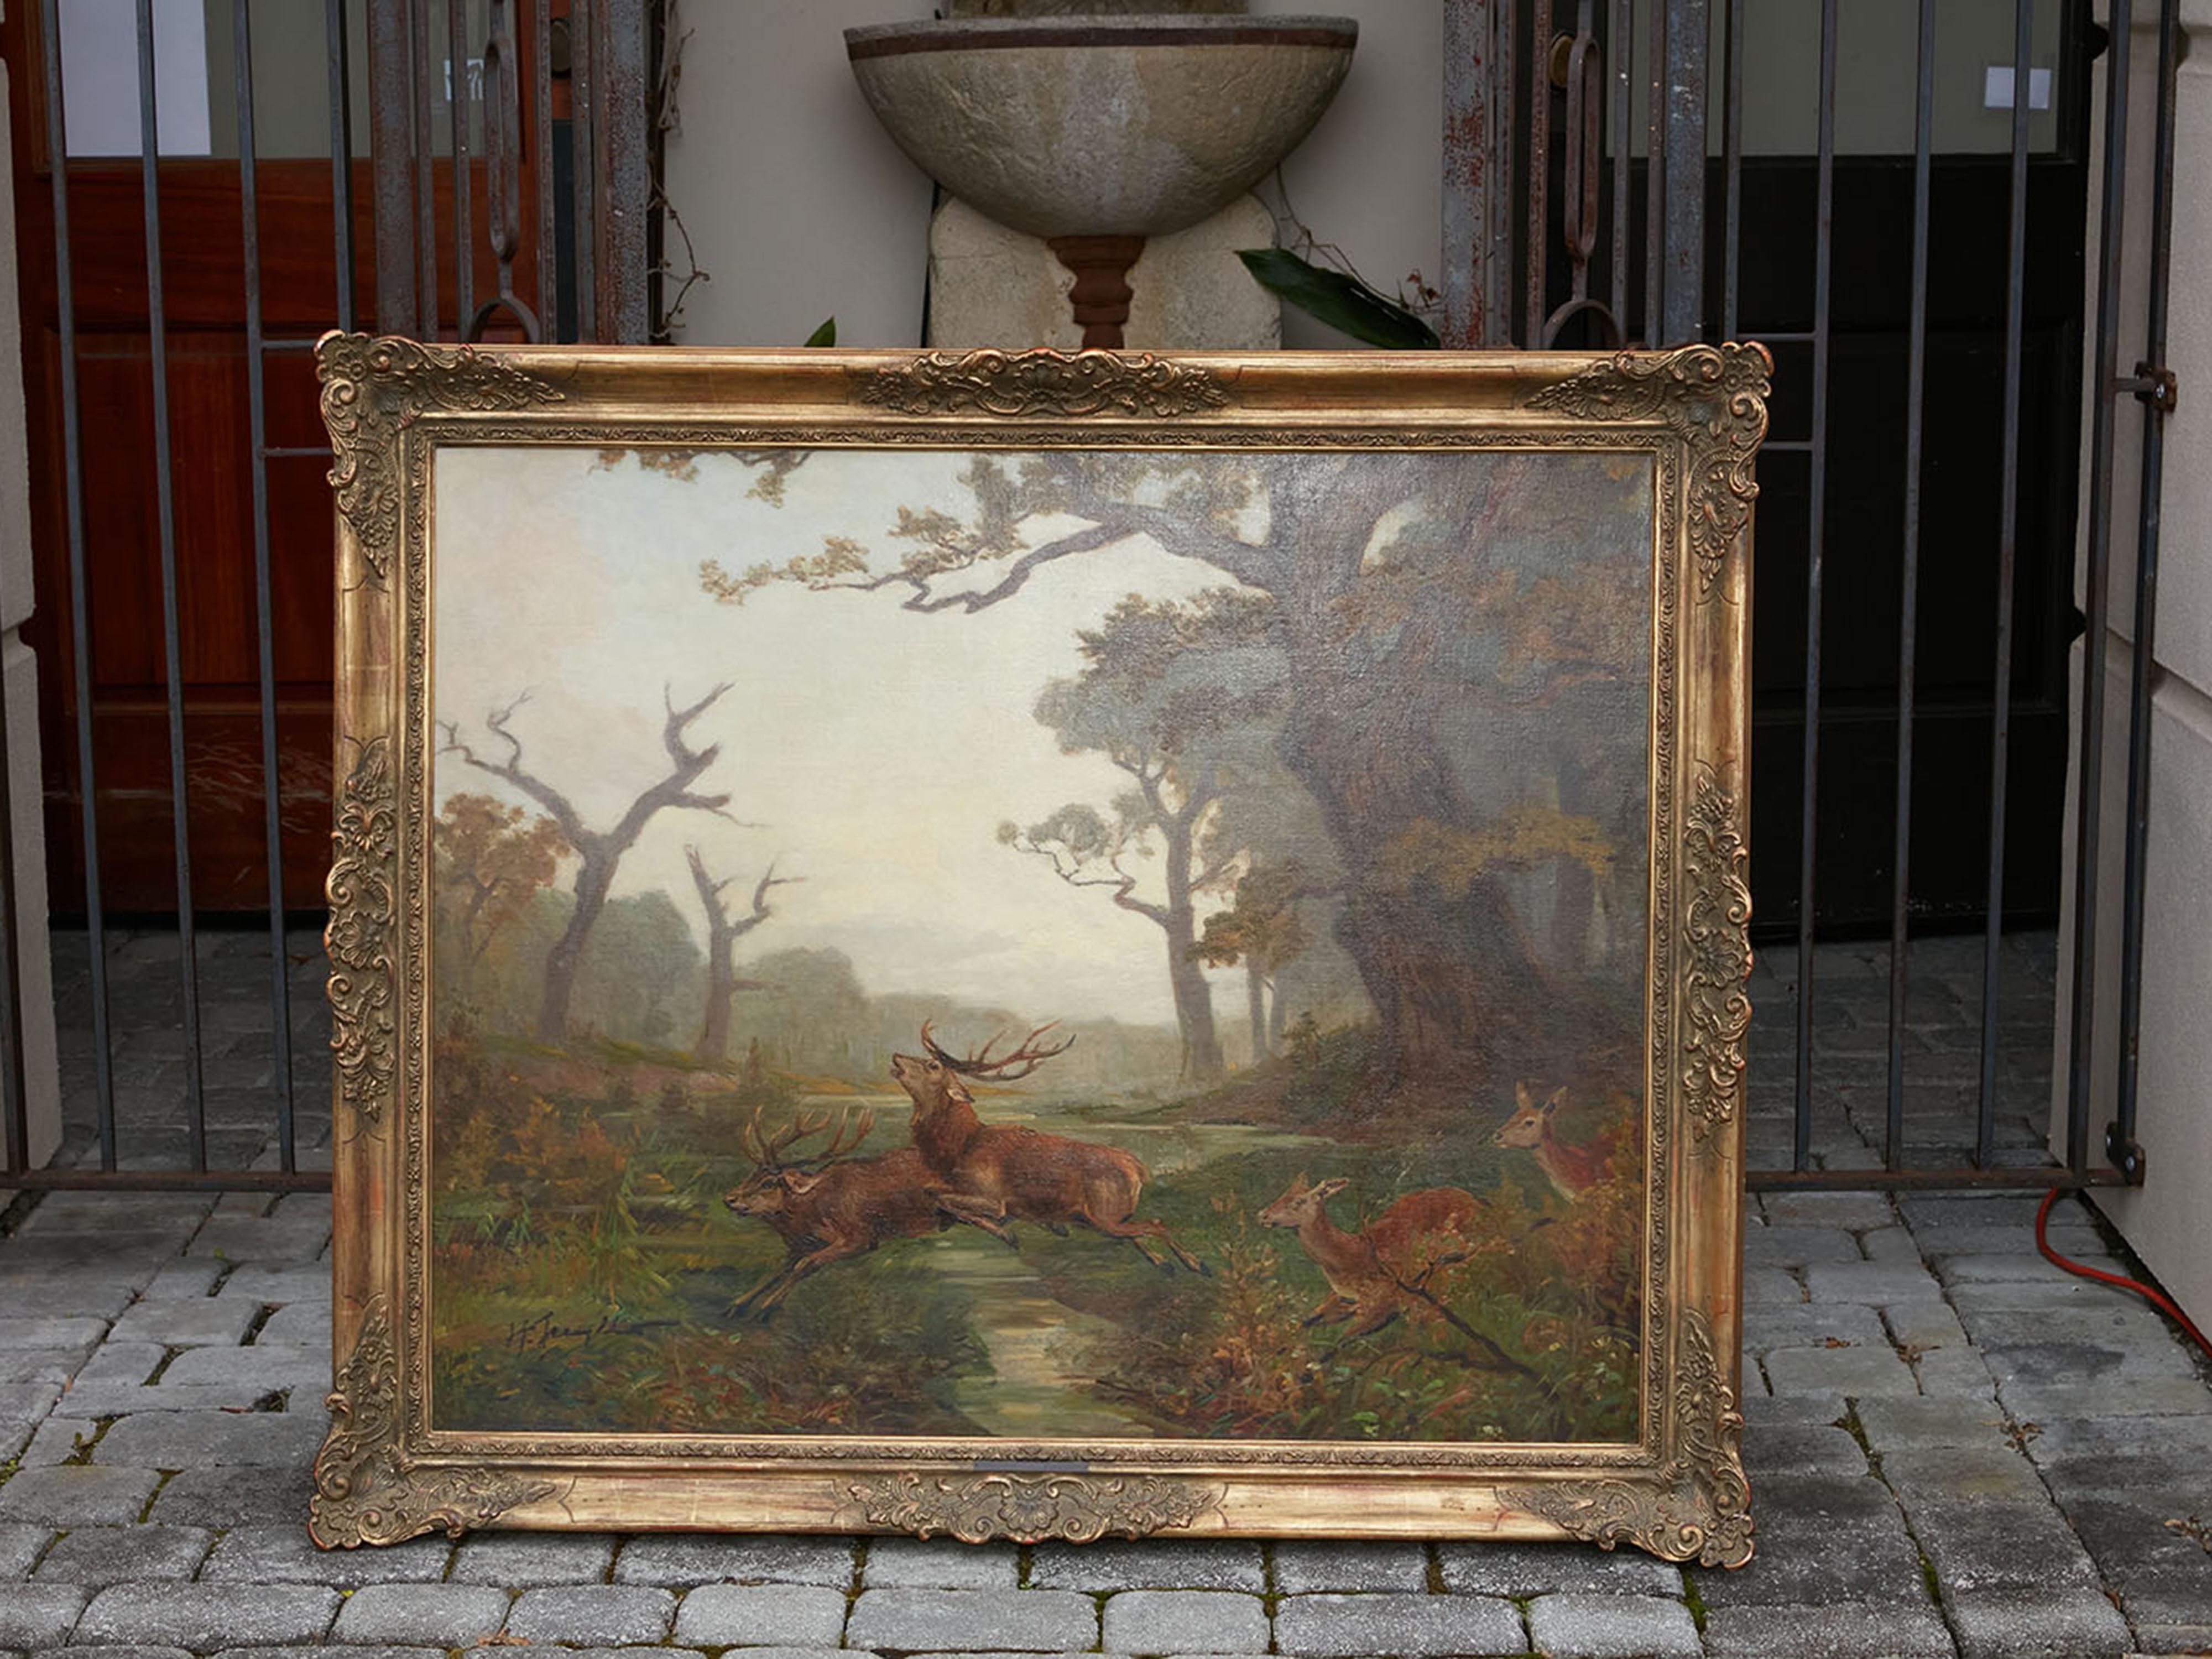 A Belgian oil on canvas painting from the early 20th century depicting a herd of deer running in the forest. Created in Belgium during the first half of the 20th century, this oil on canvas painting depicts a herd of deer exiting a forest.